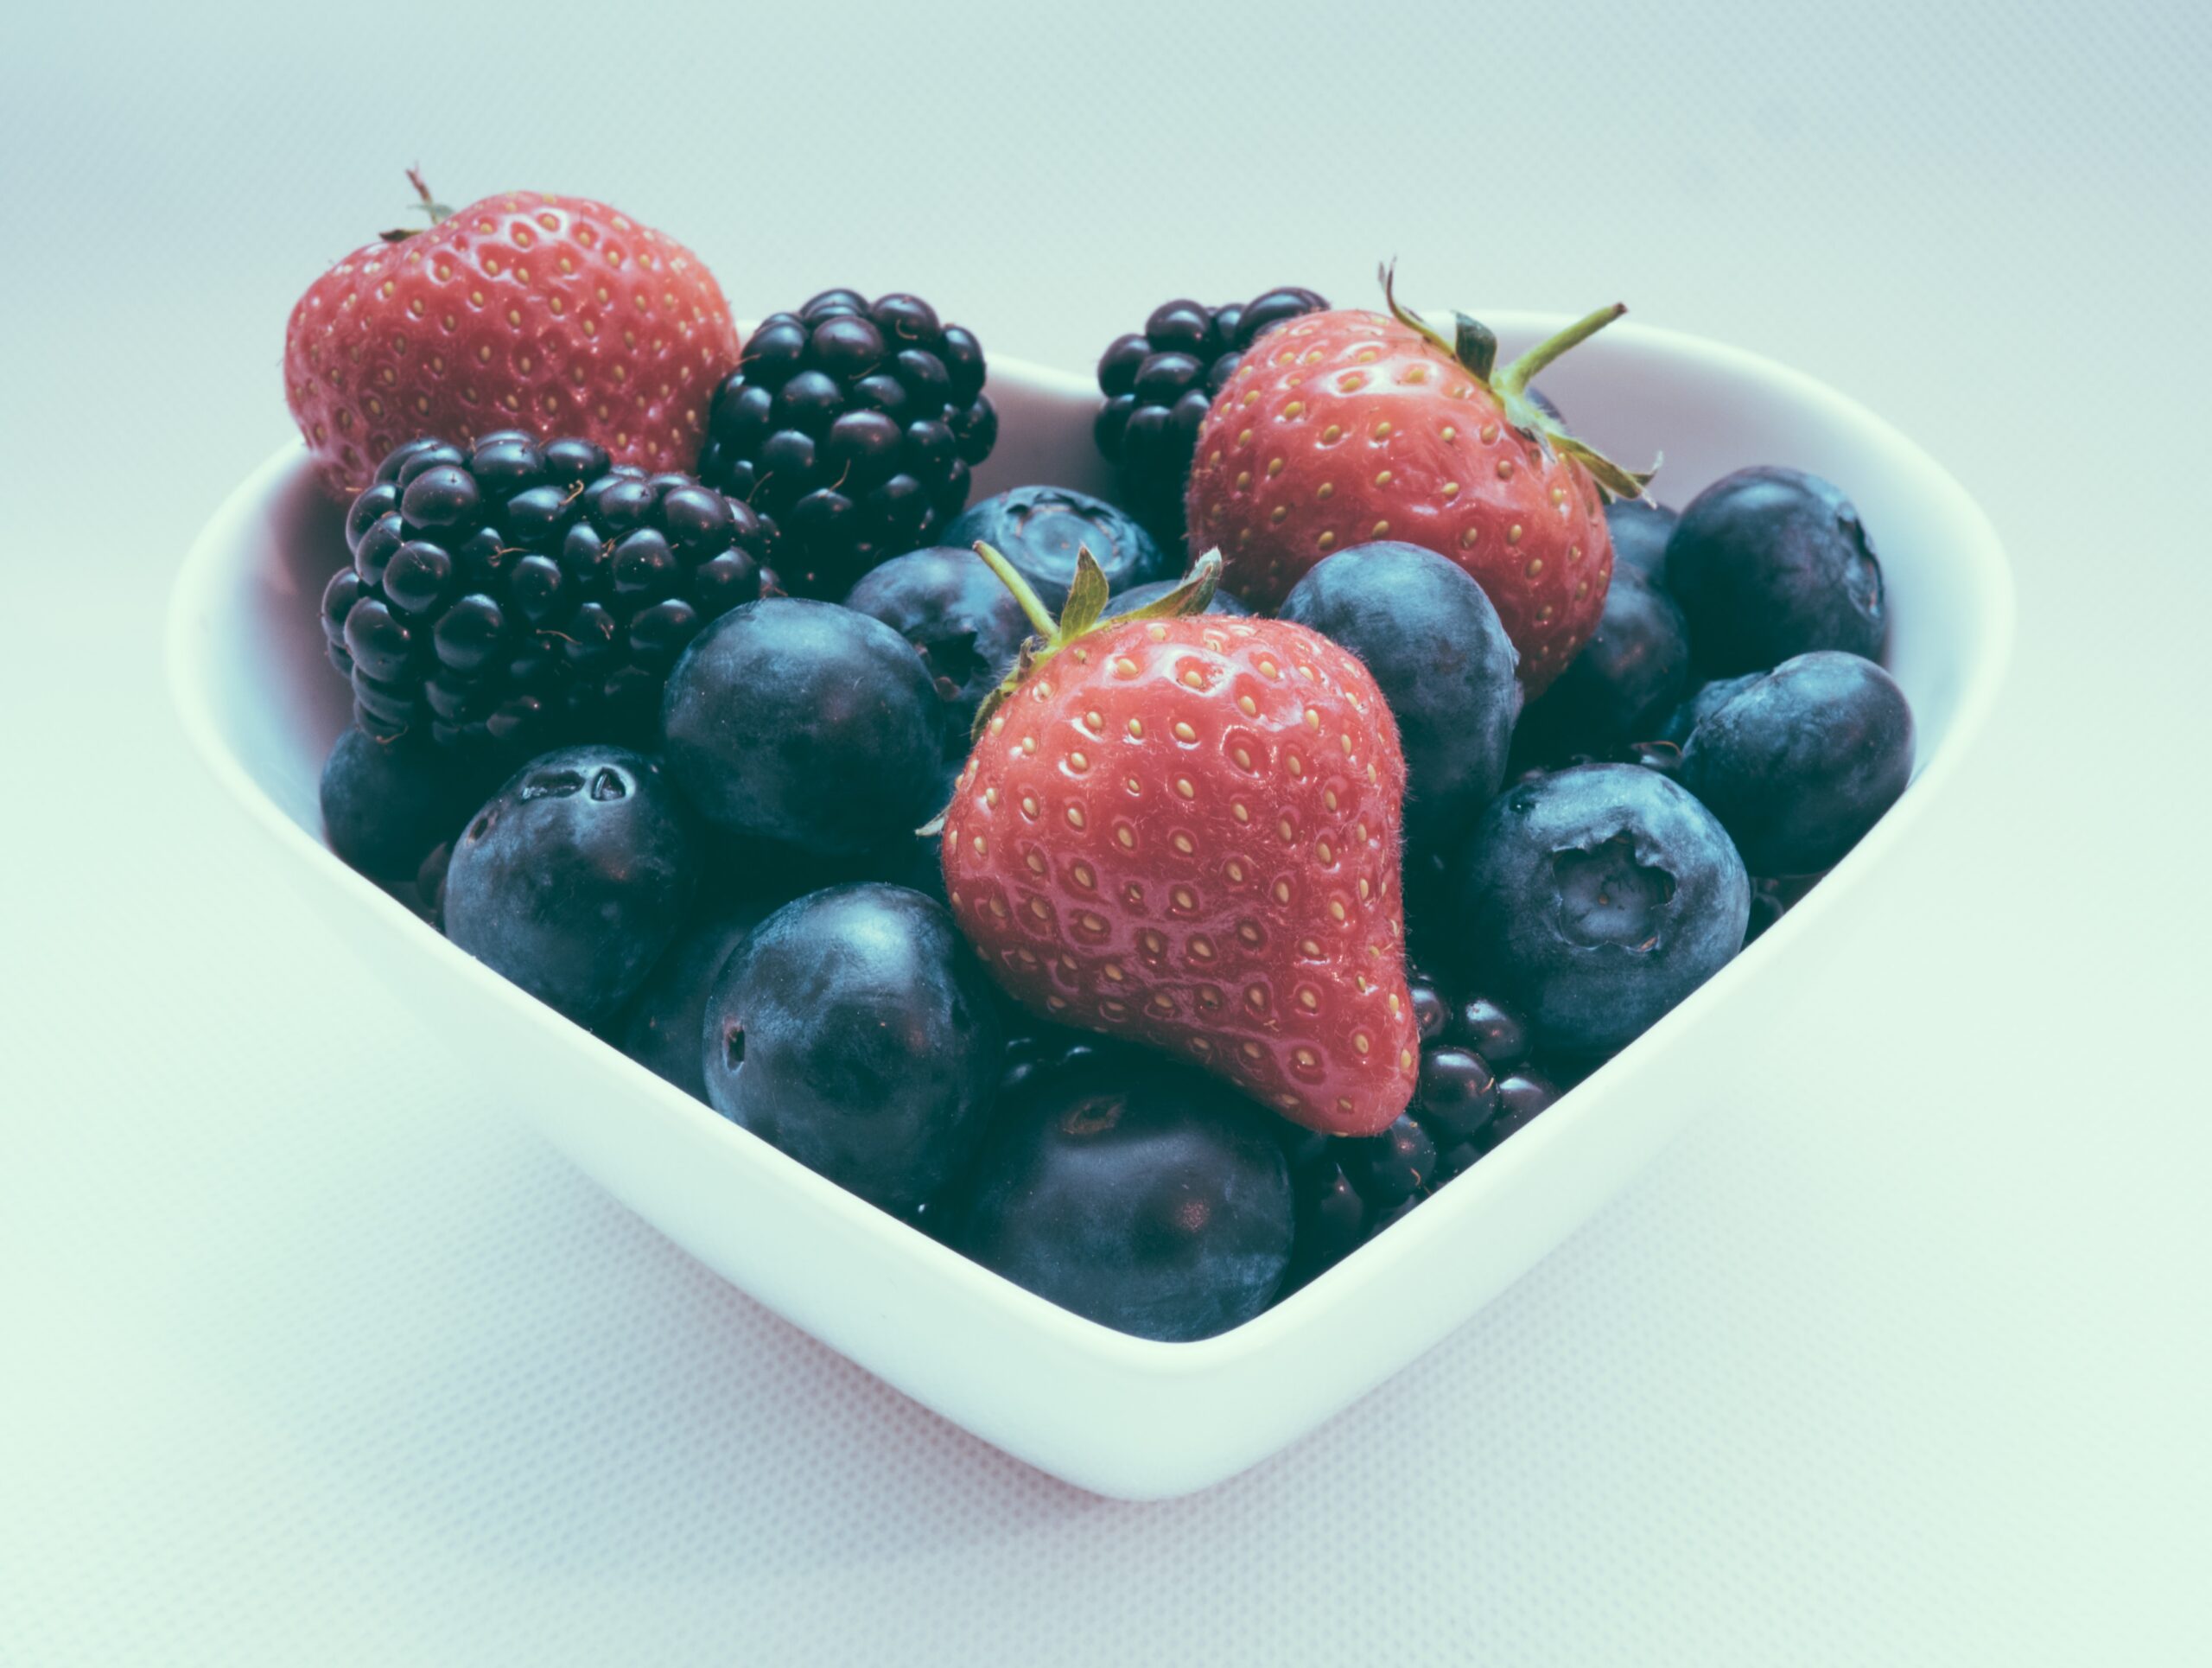 Heart-Healthy Diet: 6 Fruits That Improve Your Heart Health